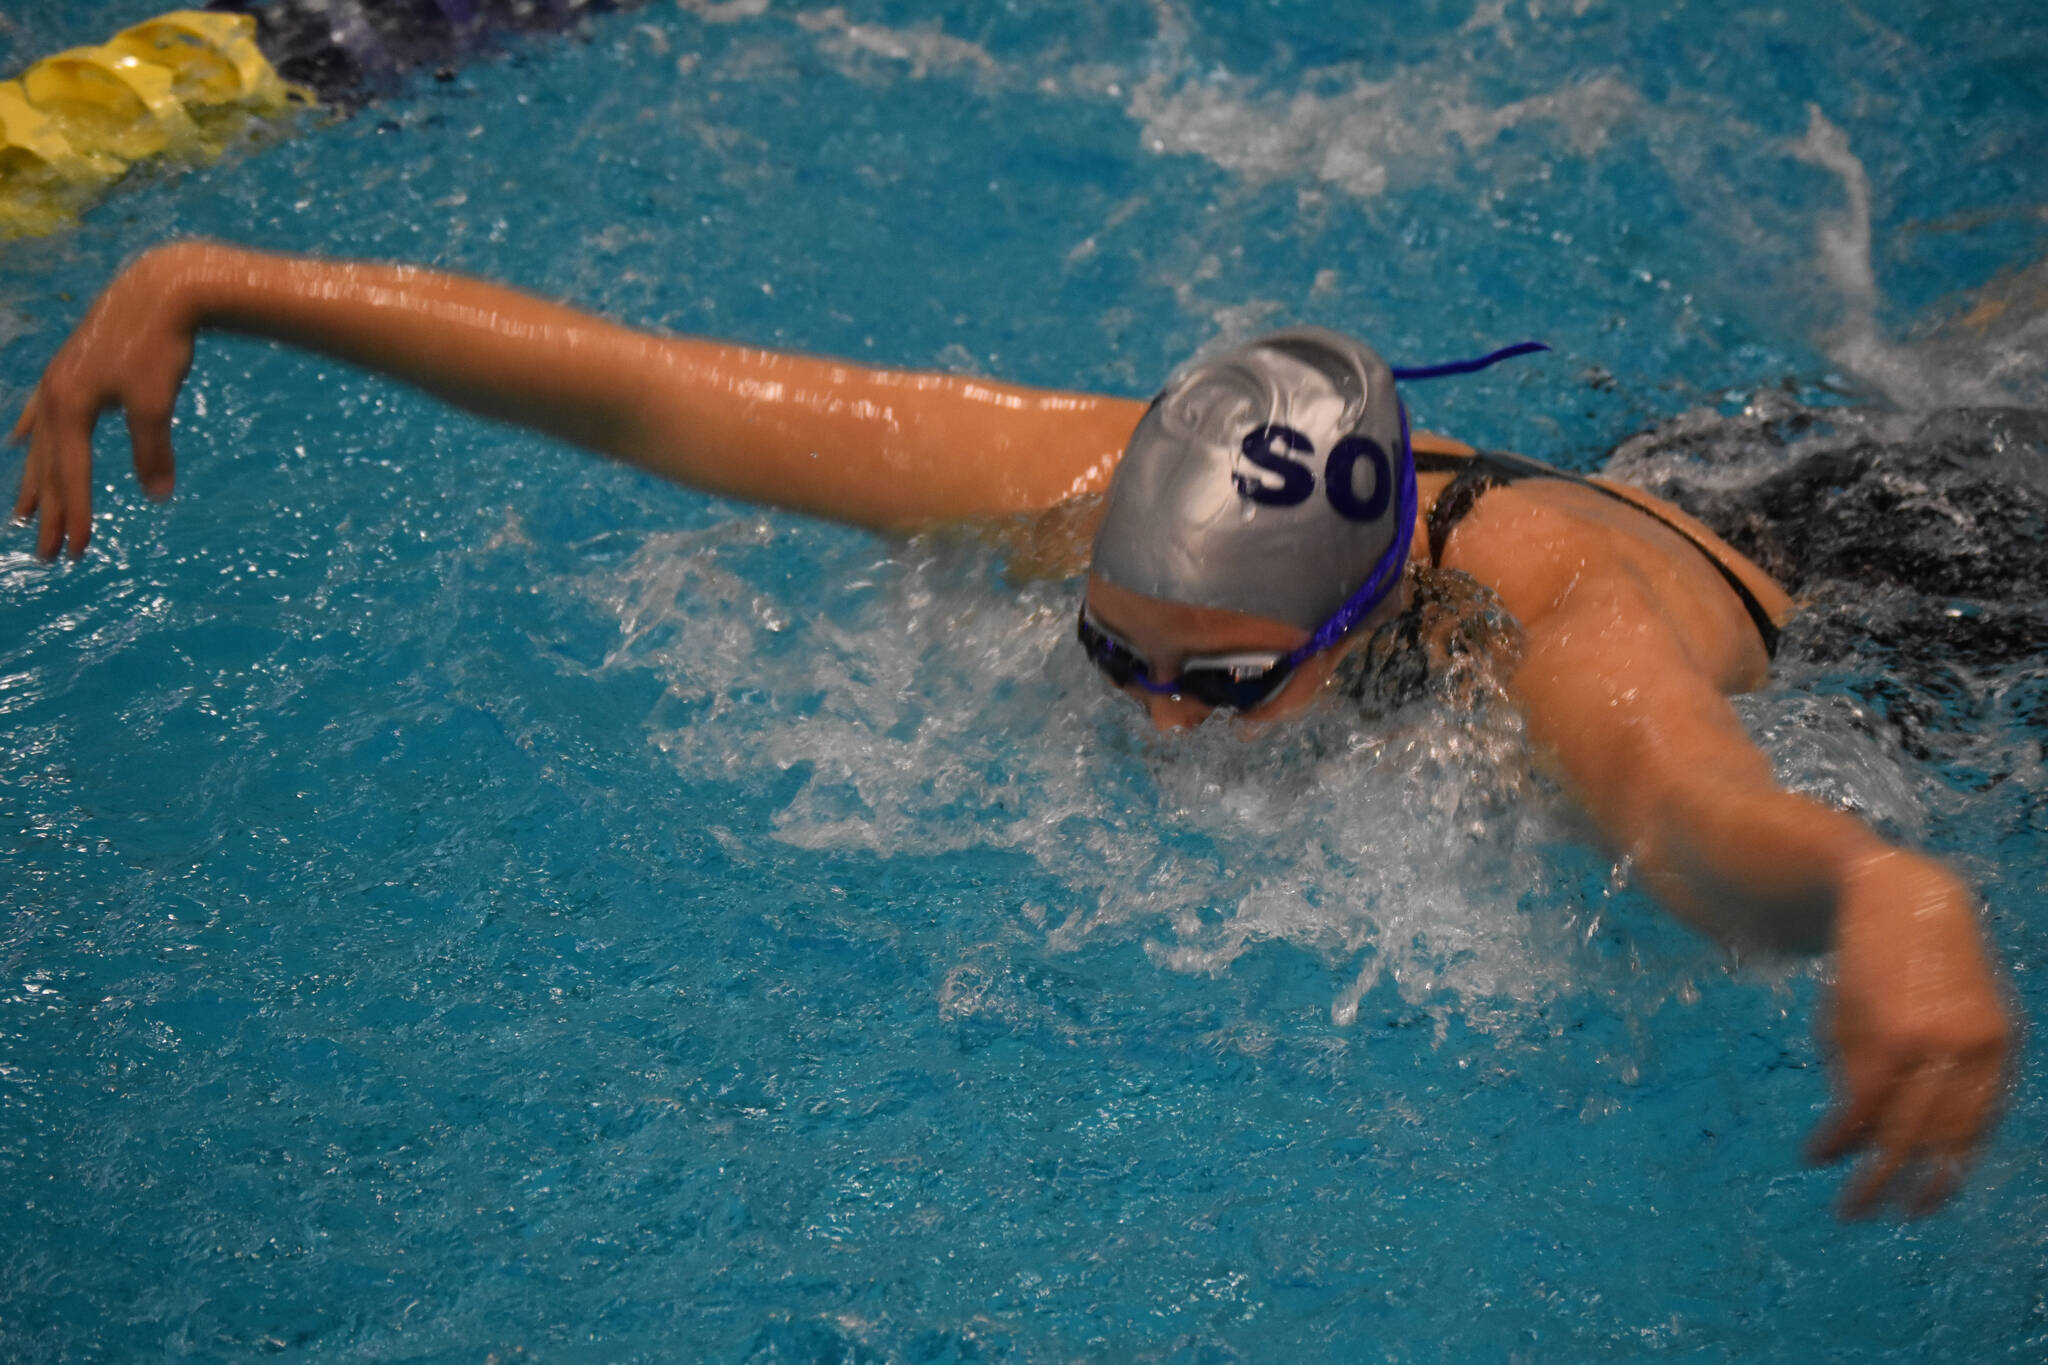 Soldotna’s Charisma Watkins swims the 100-yard butterfly during finals at the ASAA State Swim & Dive Championships on Saturday, Nov. 5, 2022, at Bartlett High School in Anchorage, Alaska. (Jake Dye/Peninsula Clarion)